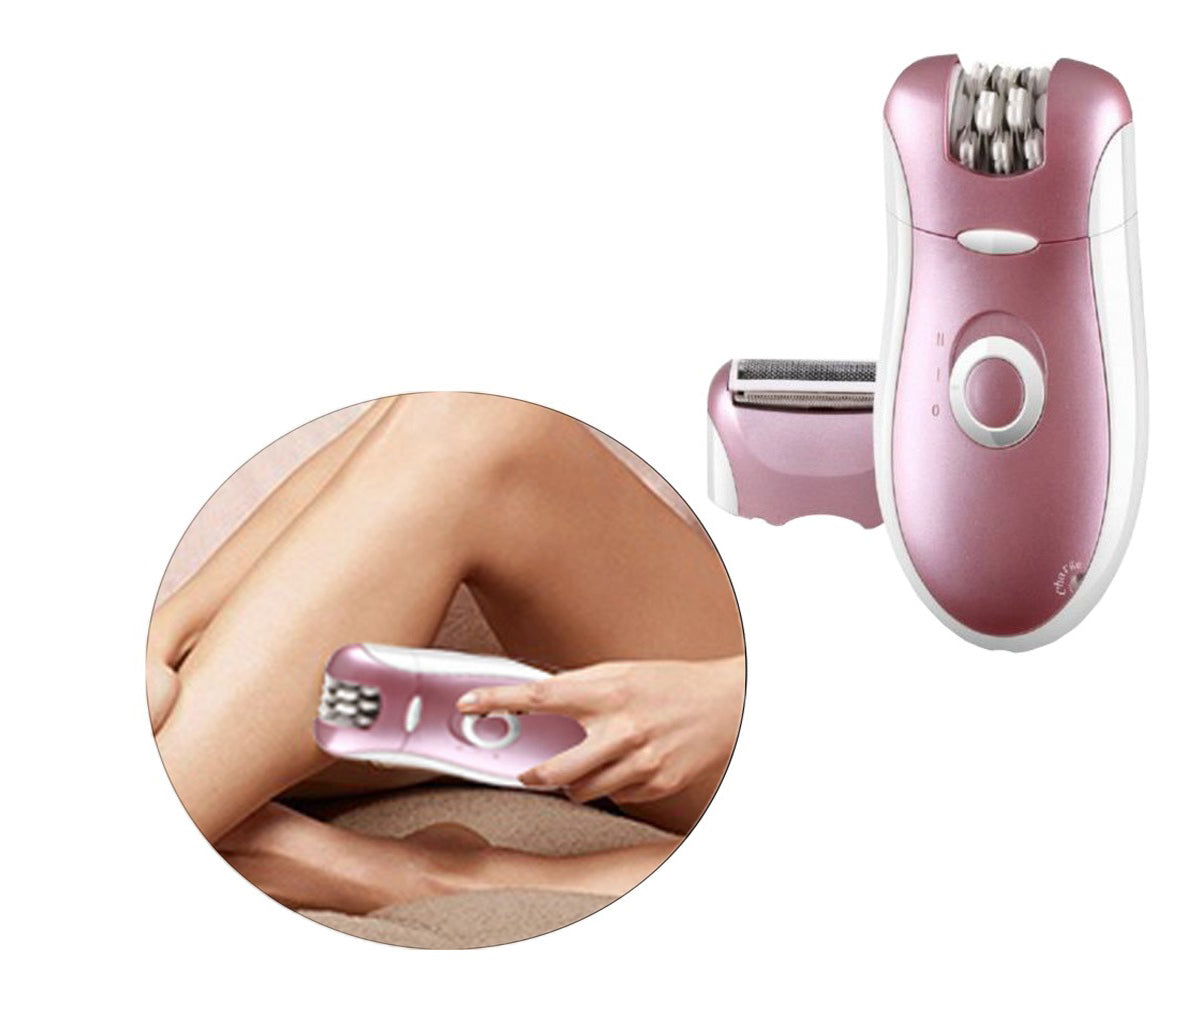 2-in-1 Hair Removal Device - Epilator and Shaver in One